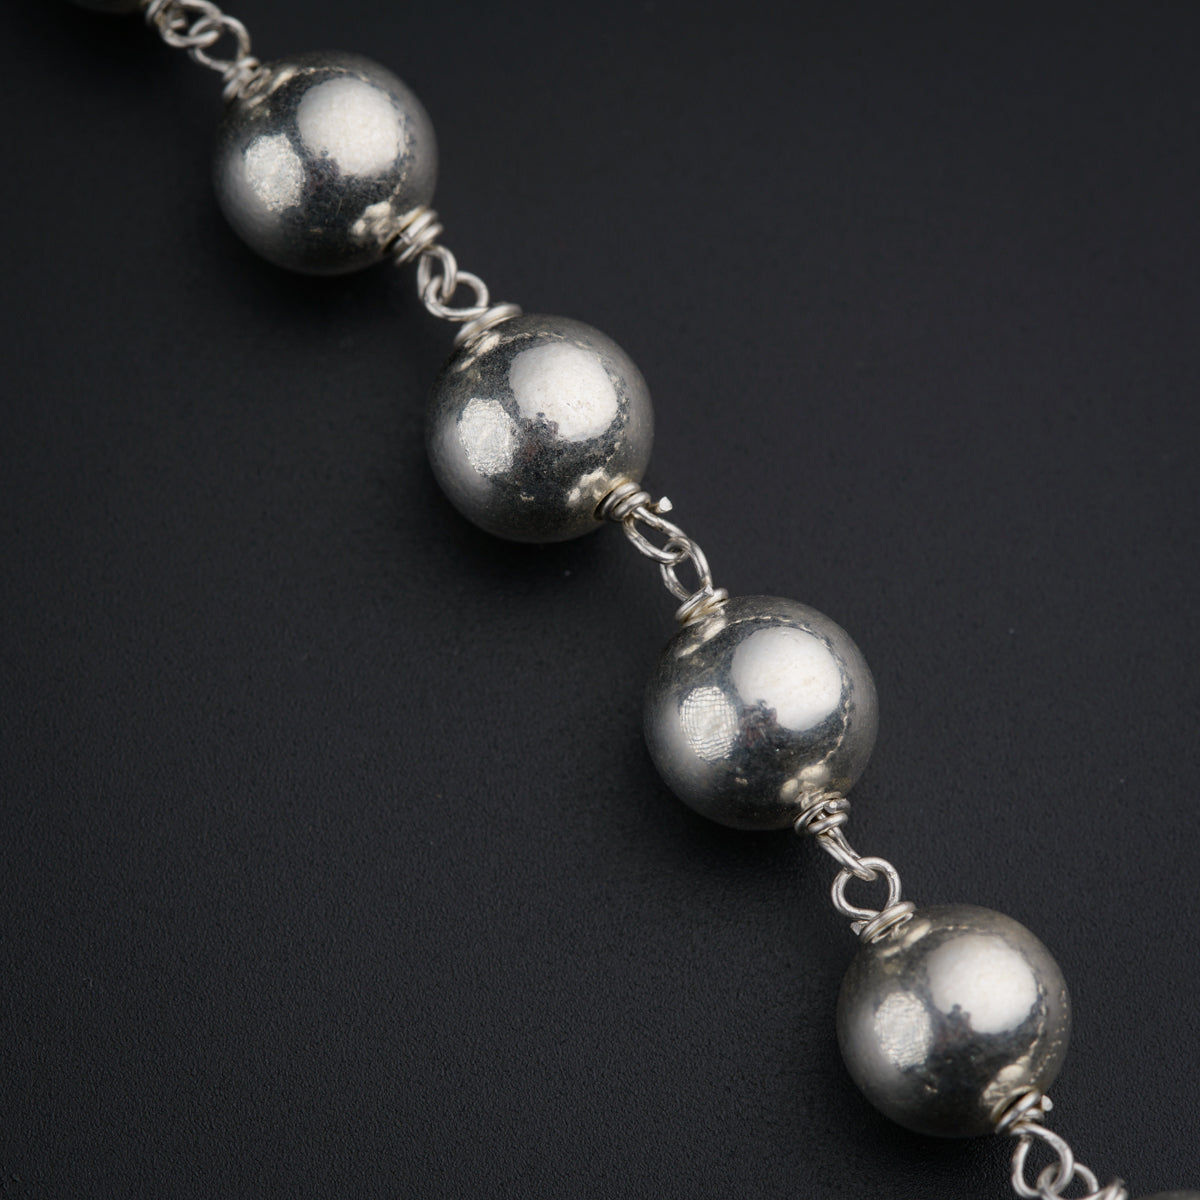 a close up of a chain with balls on it